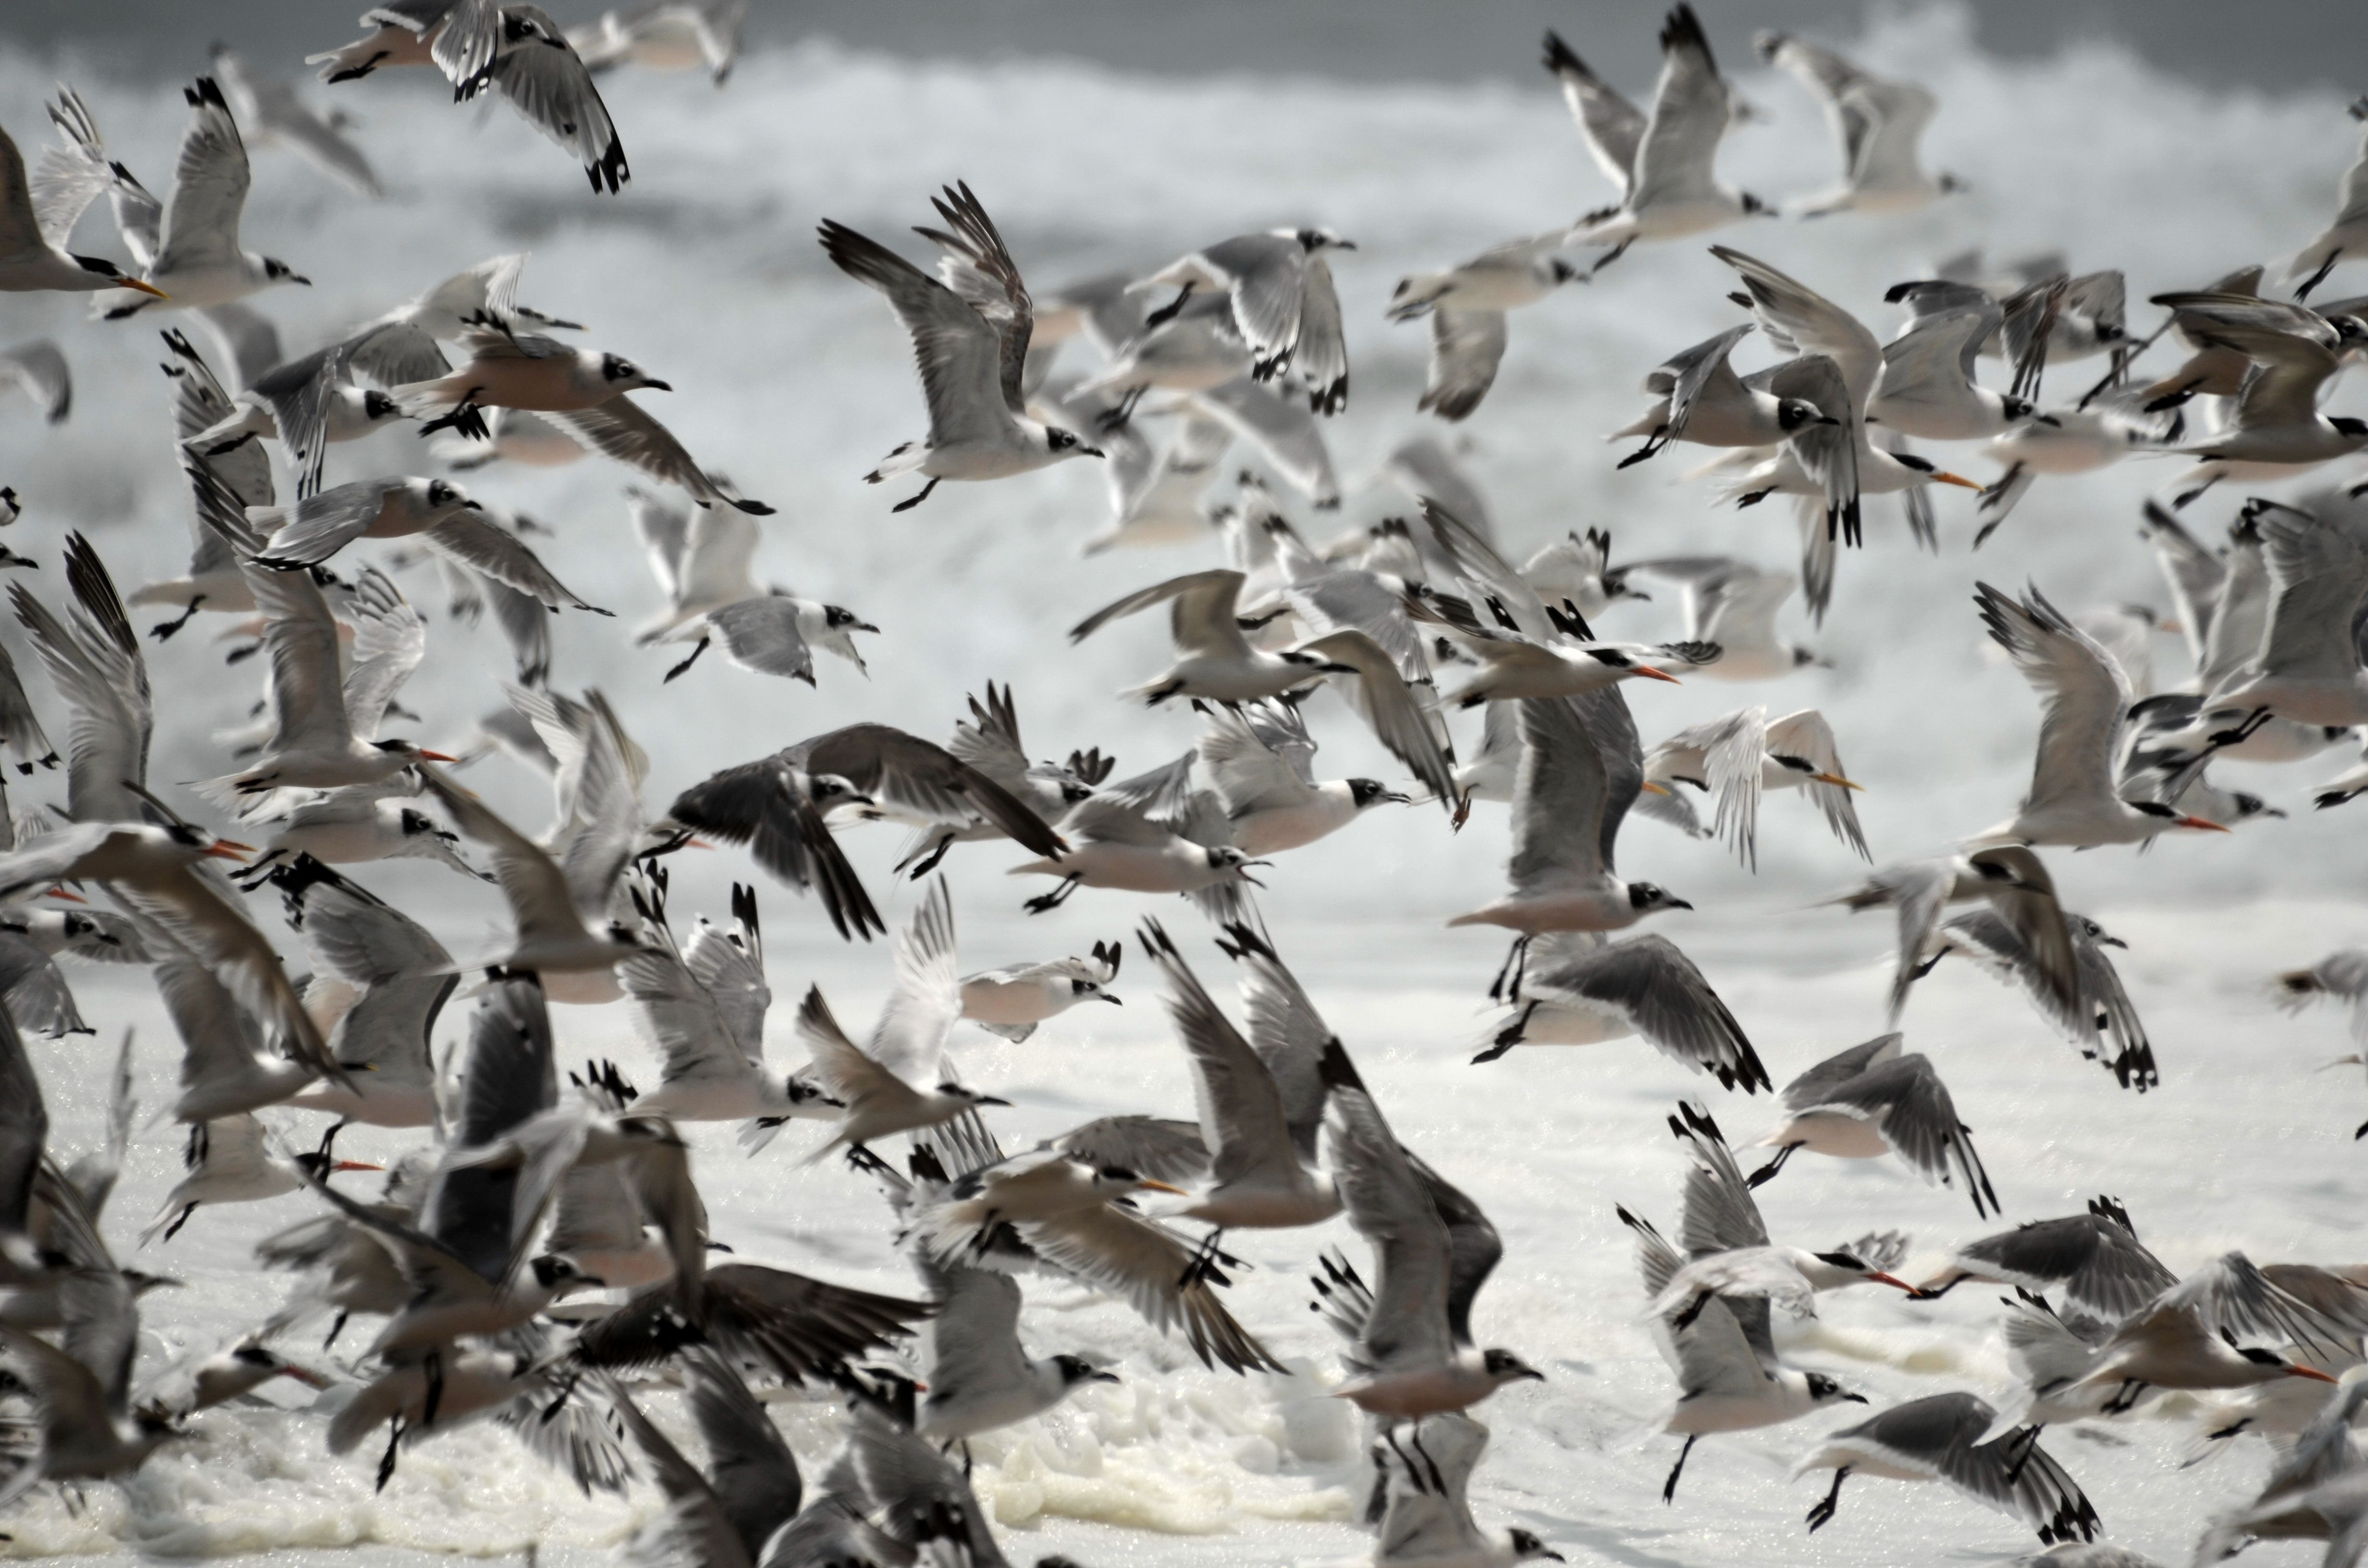 Click picture to see more Gulls at Club Garzareal Beach.